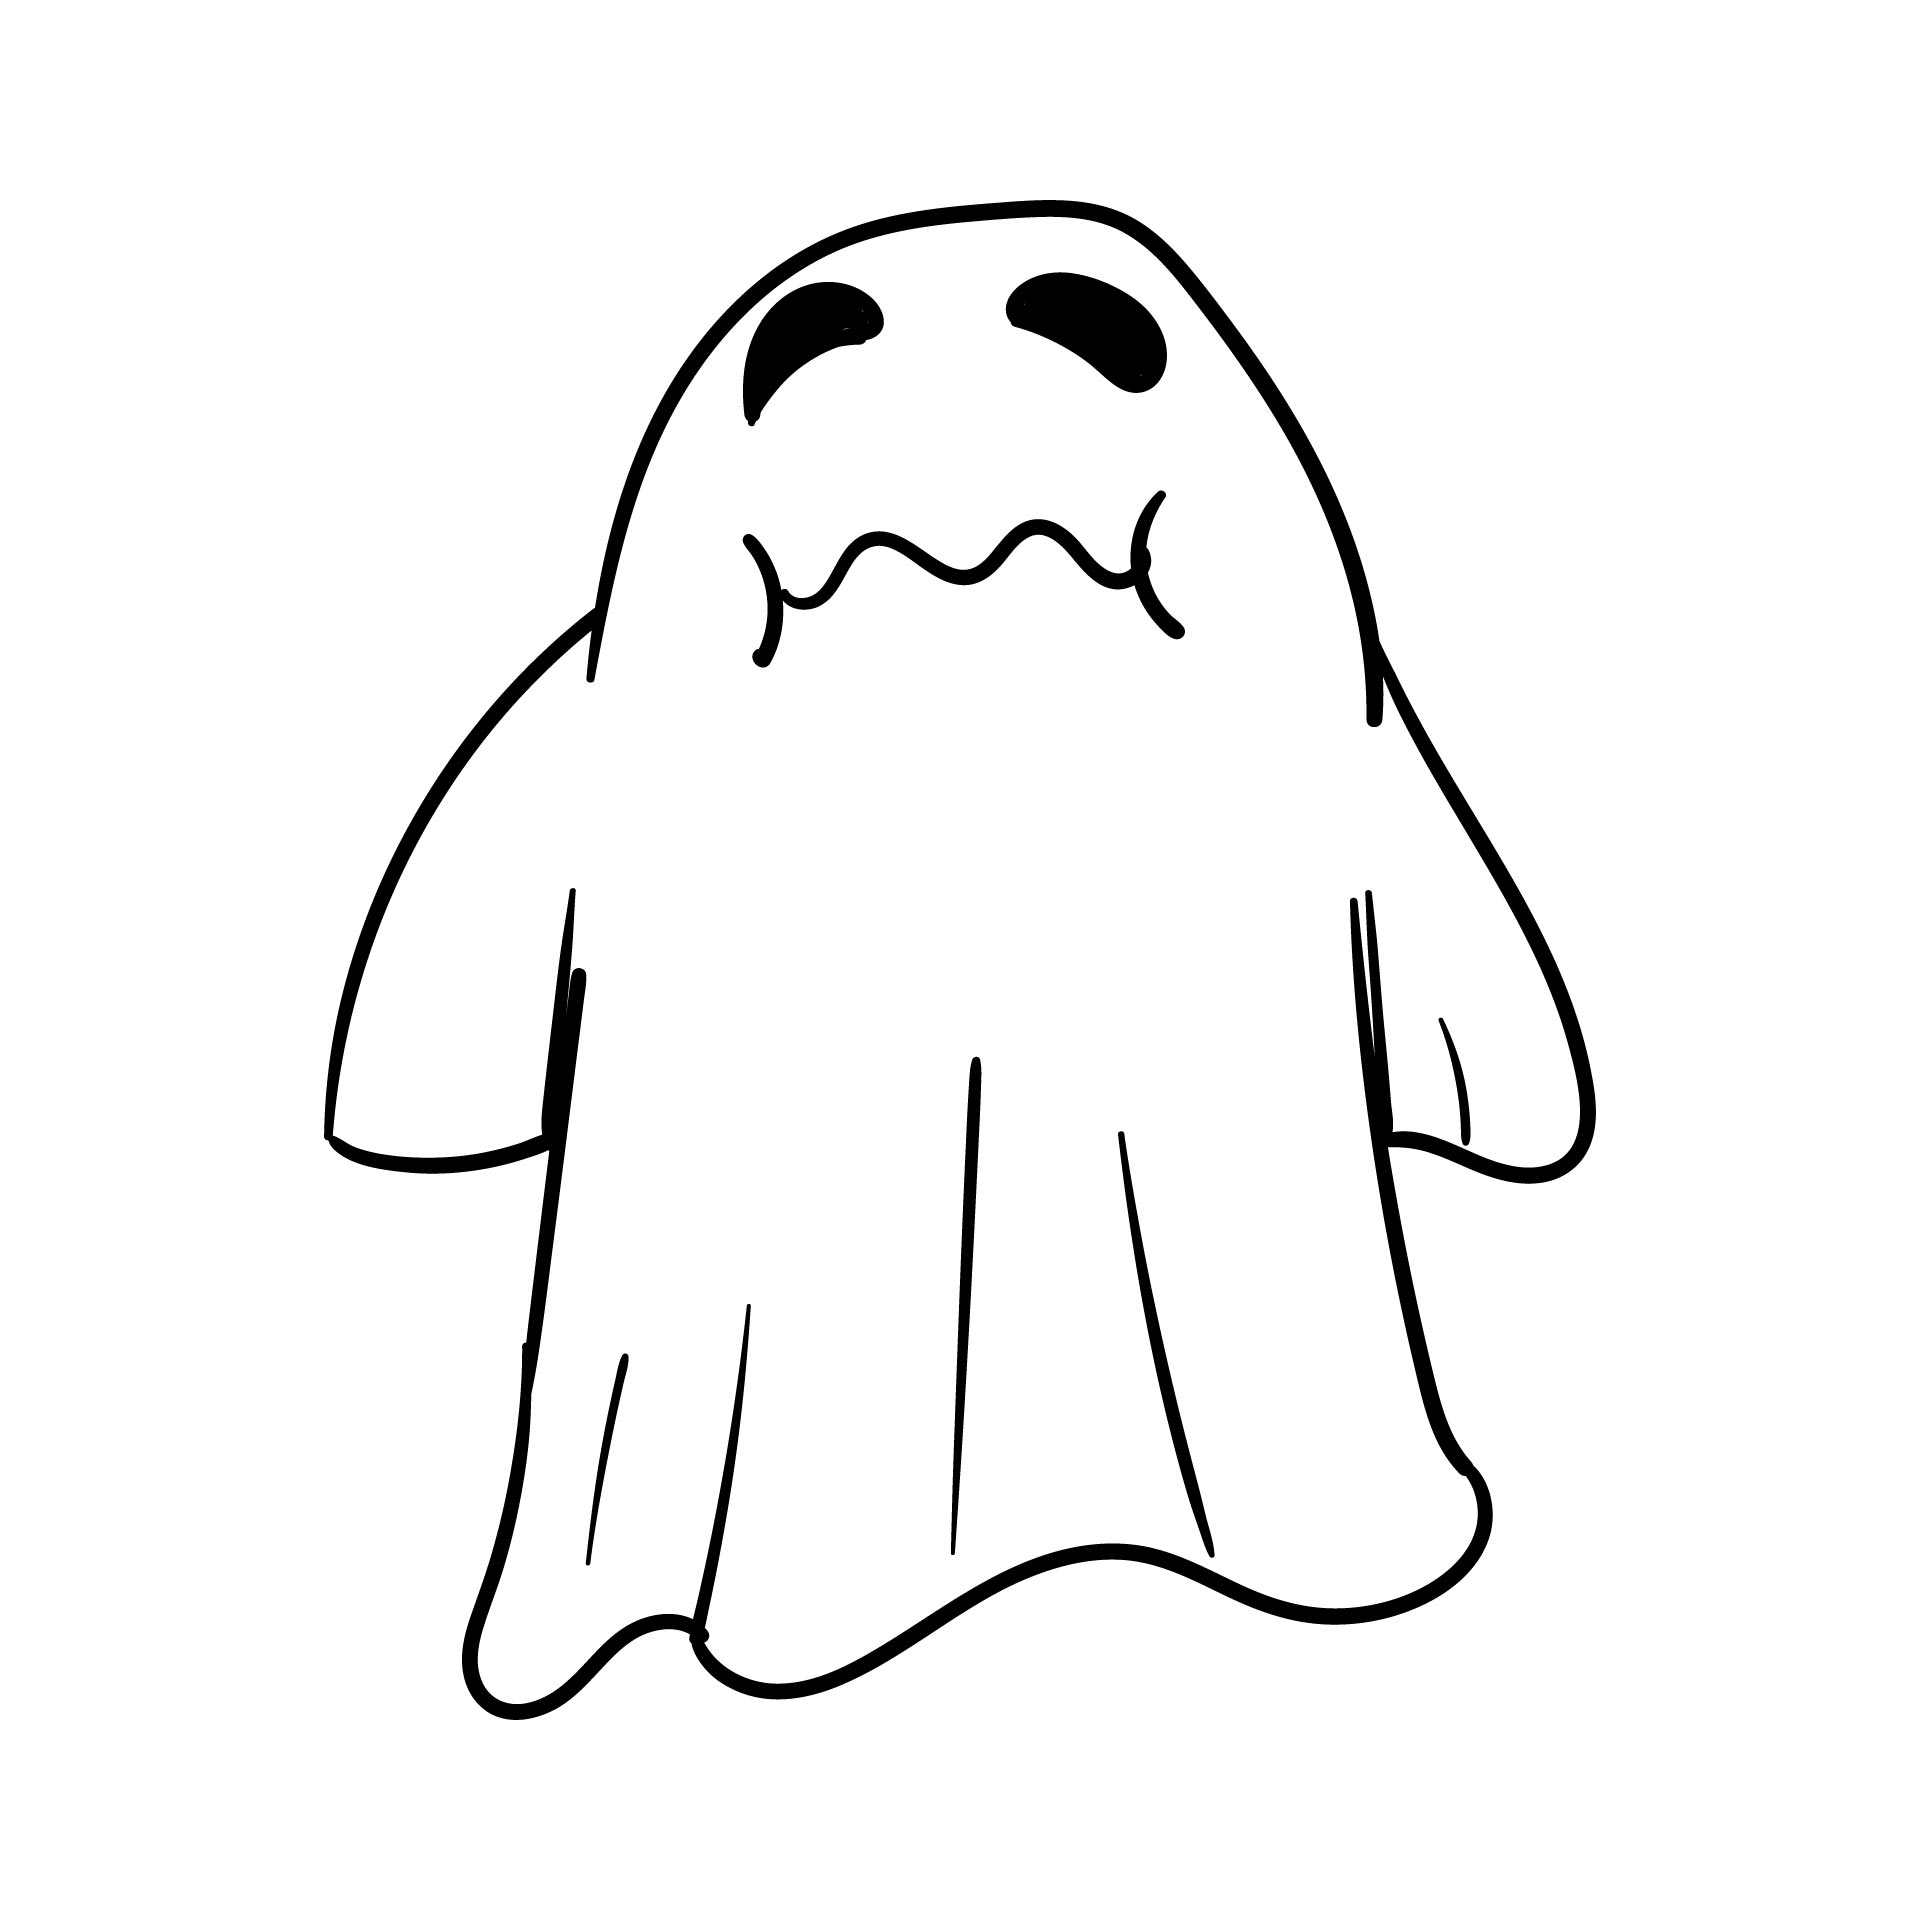 Halloween Scene With A Cute Ghost Coloring Page